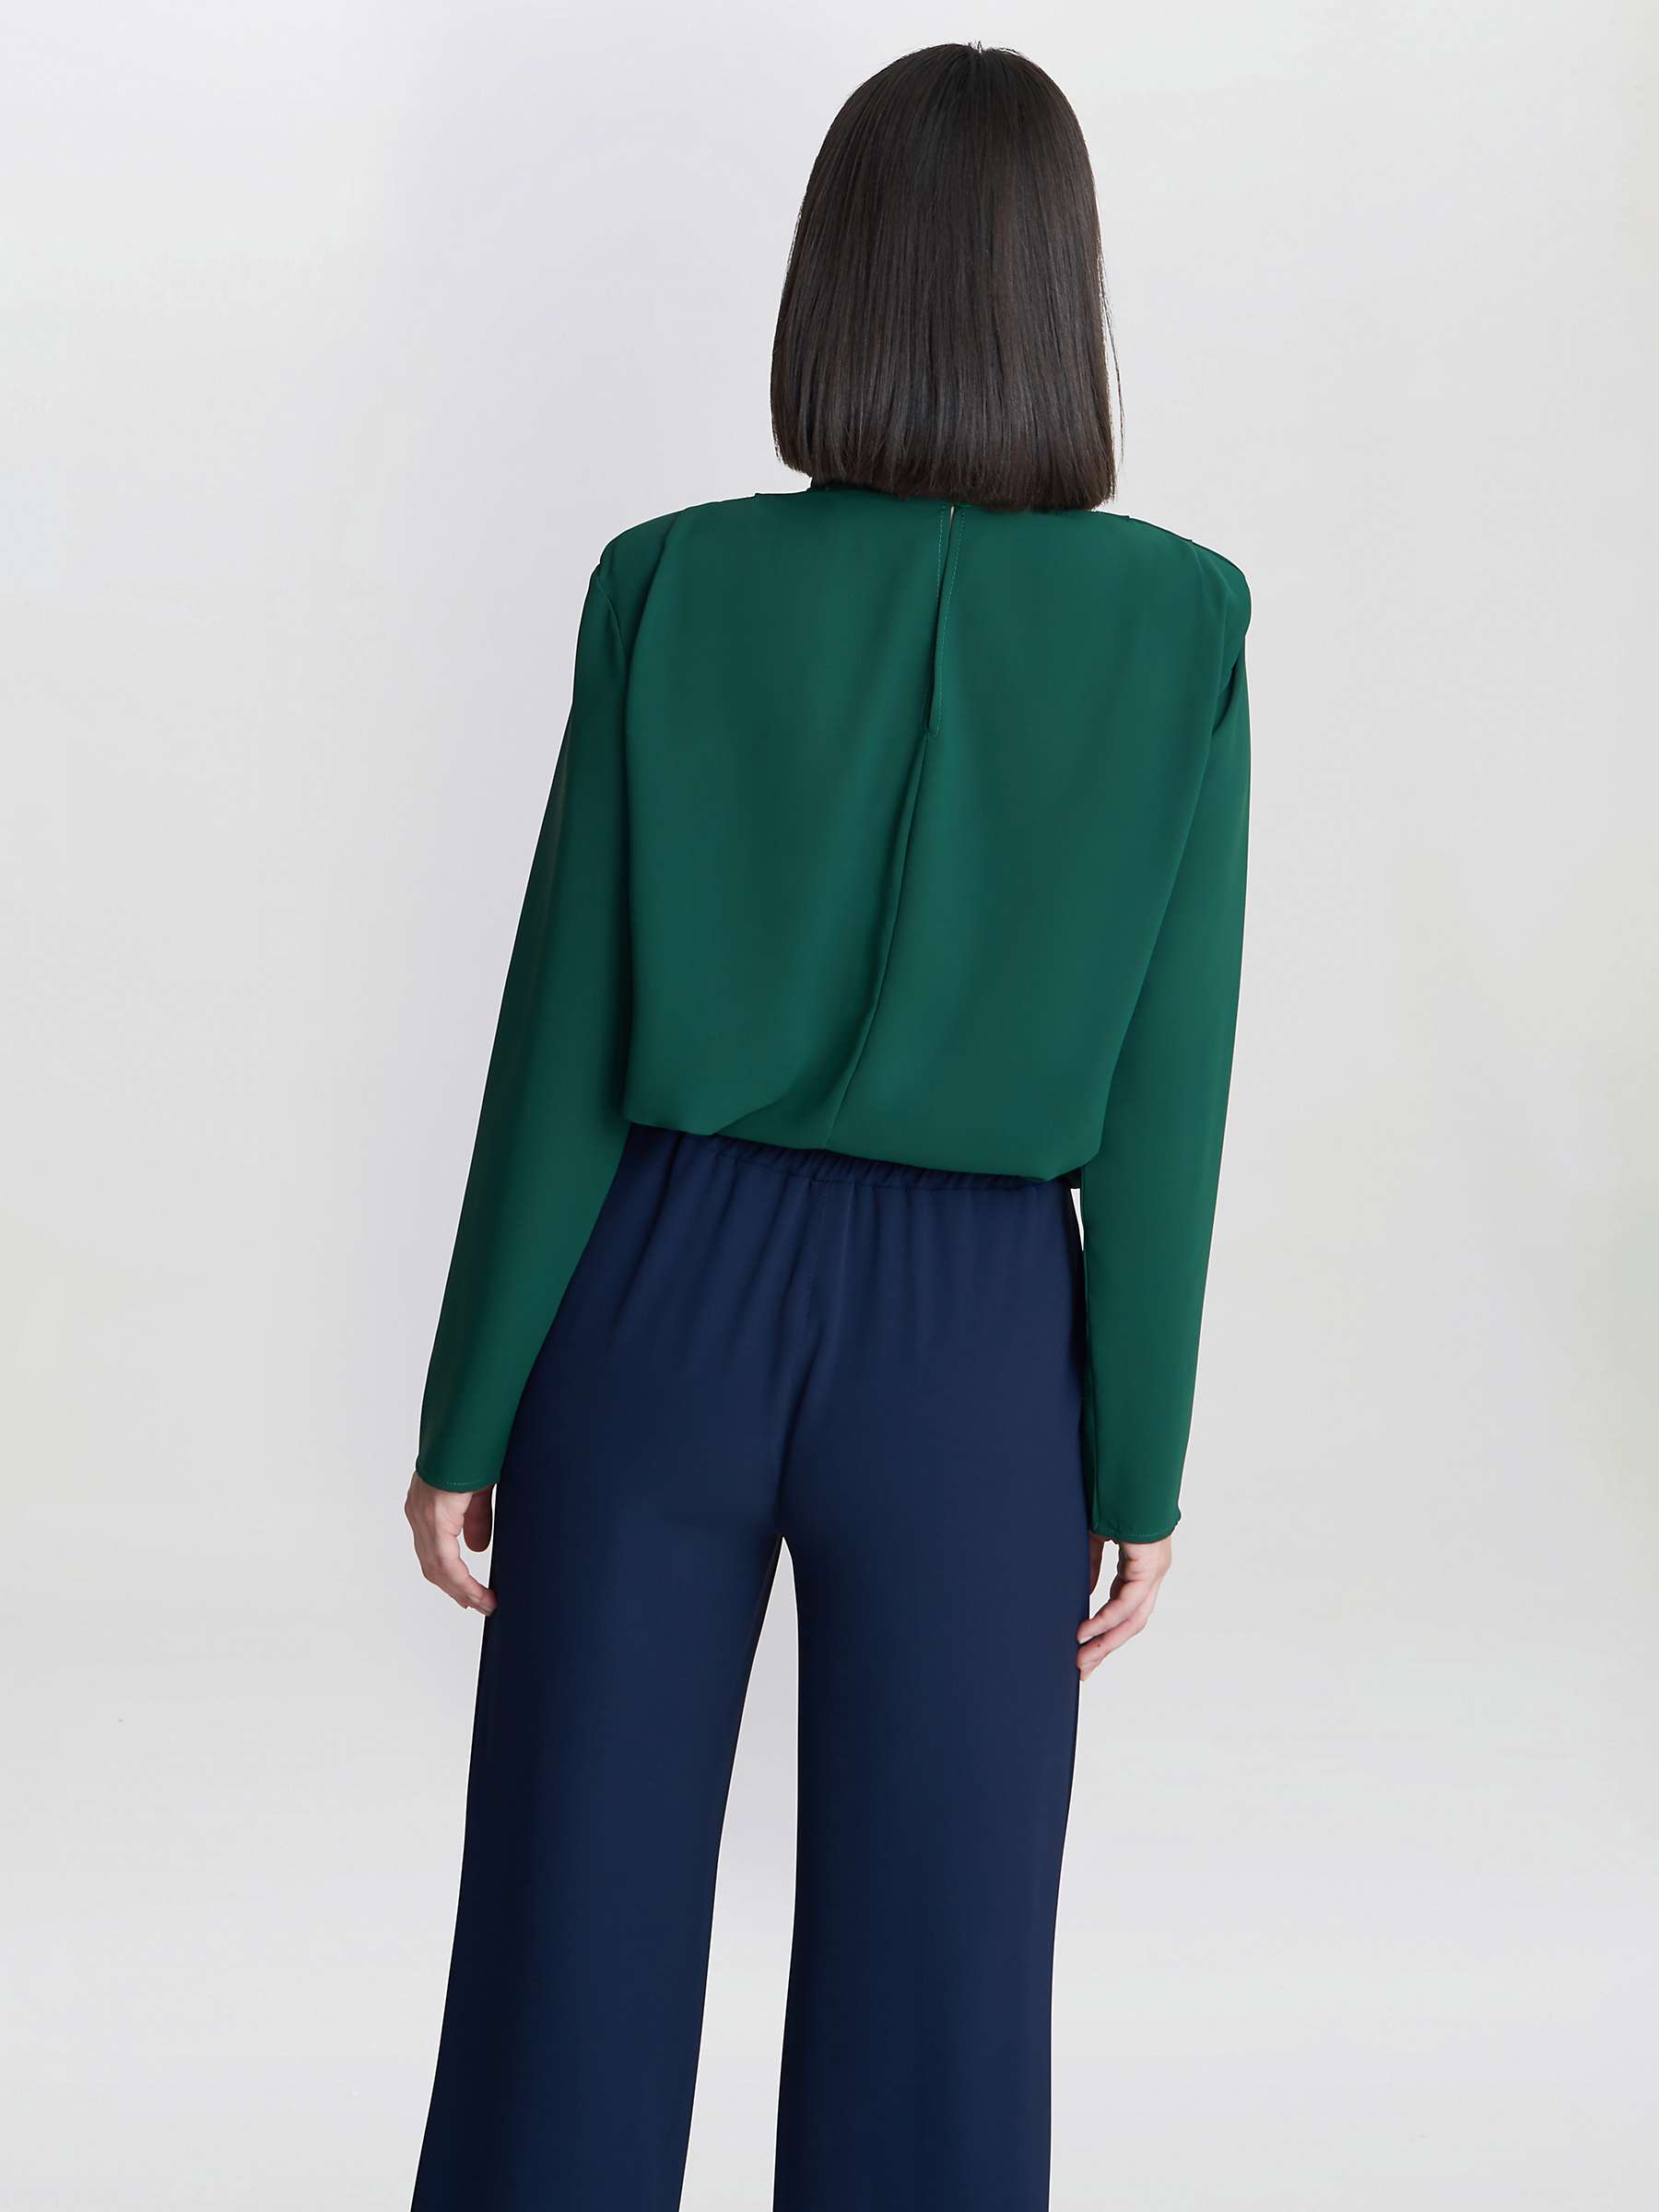 Buy Gina Bacconi  Annika Crepe Pull On Trousers Online at johnlewis.com